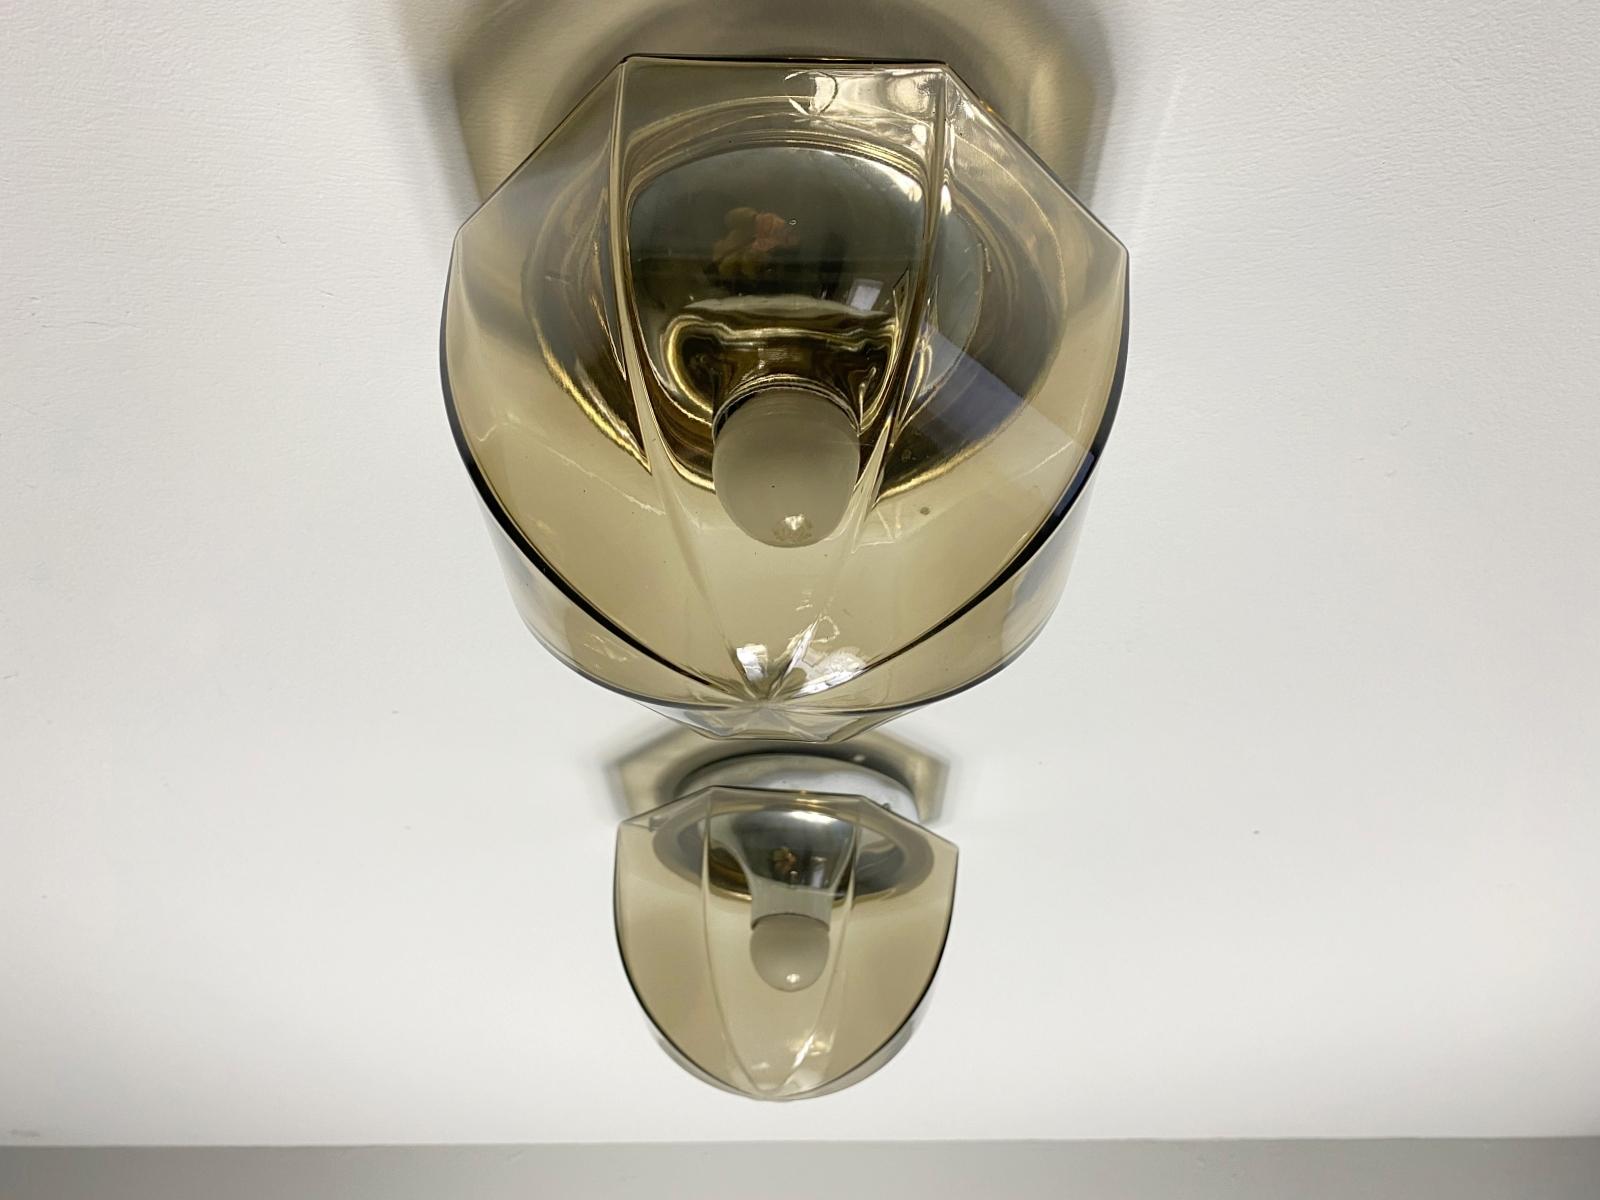 Hillebrand Chrome & Smoked Glass Sconce Flush Mount Lights, 1970s, Germany In Excellent Condition For Sale In Biebergemund, Hessen